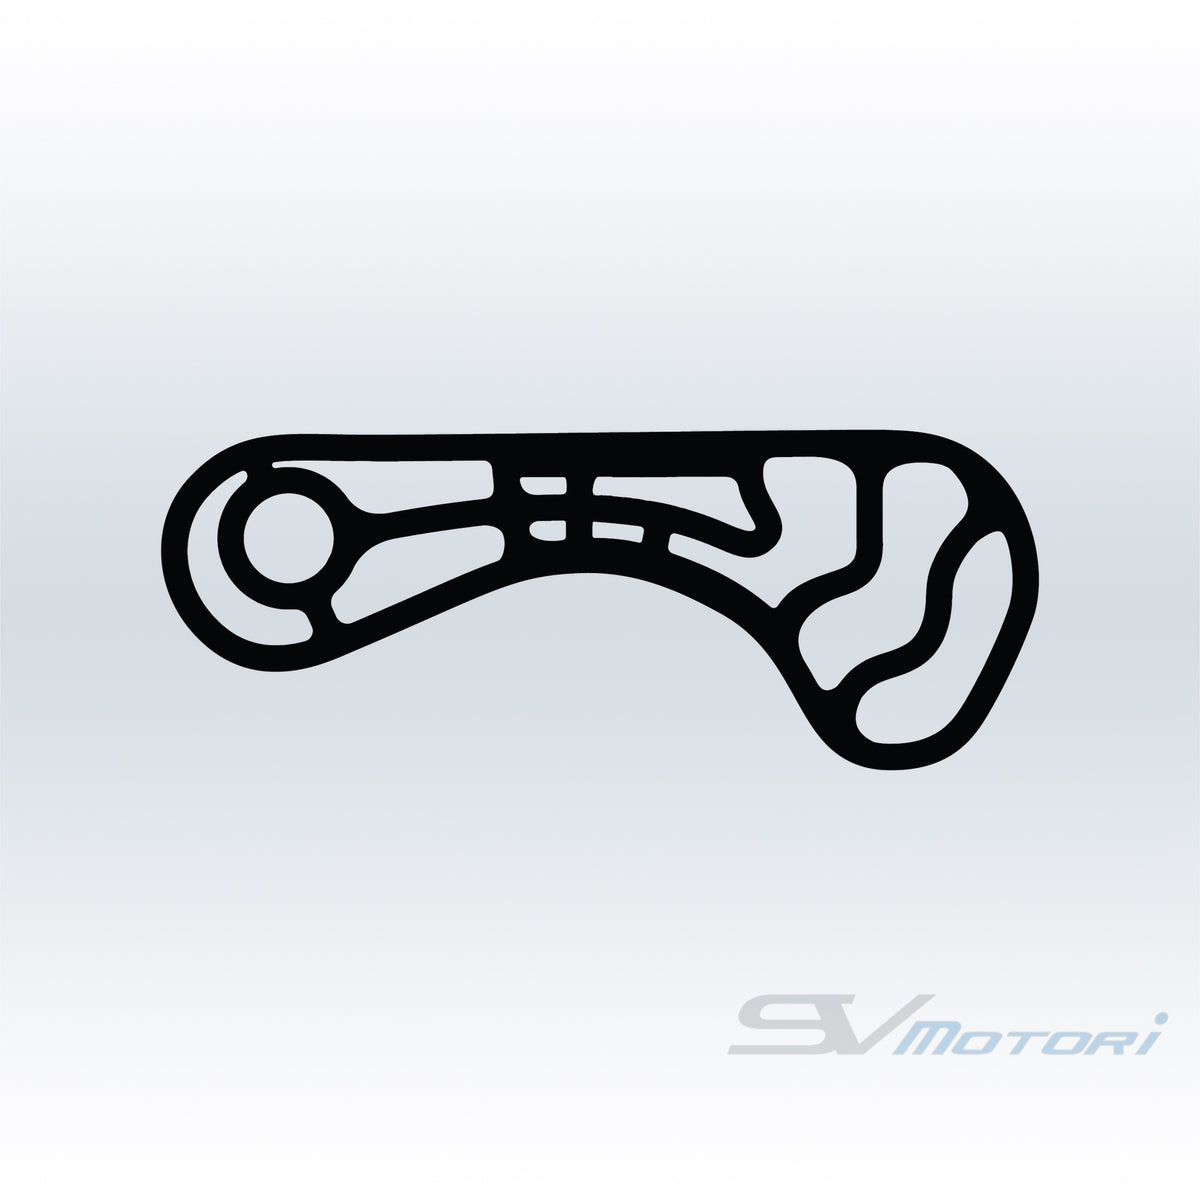 BMW Performance Center East Track Outline Decal